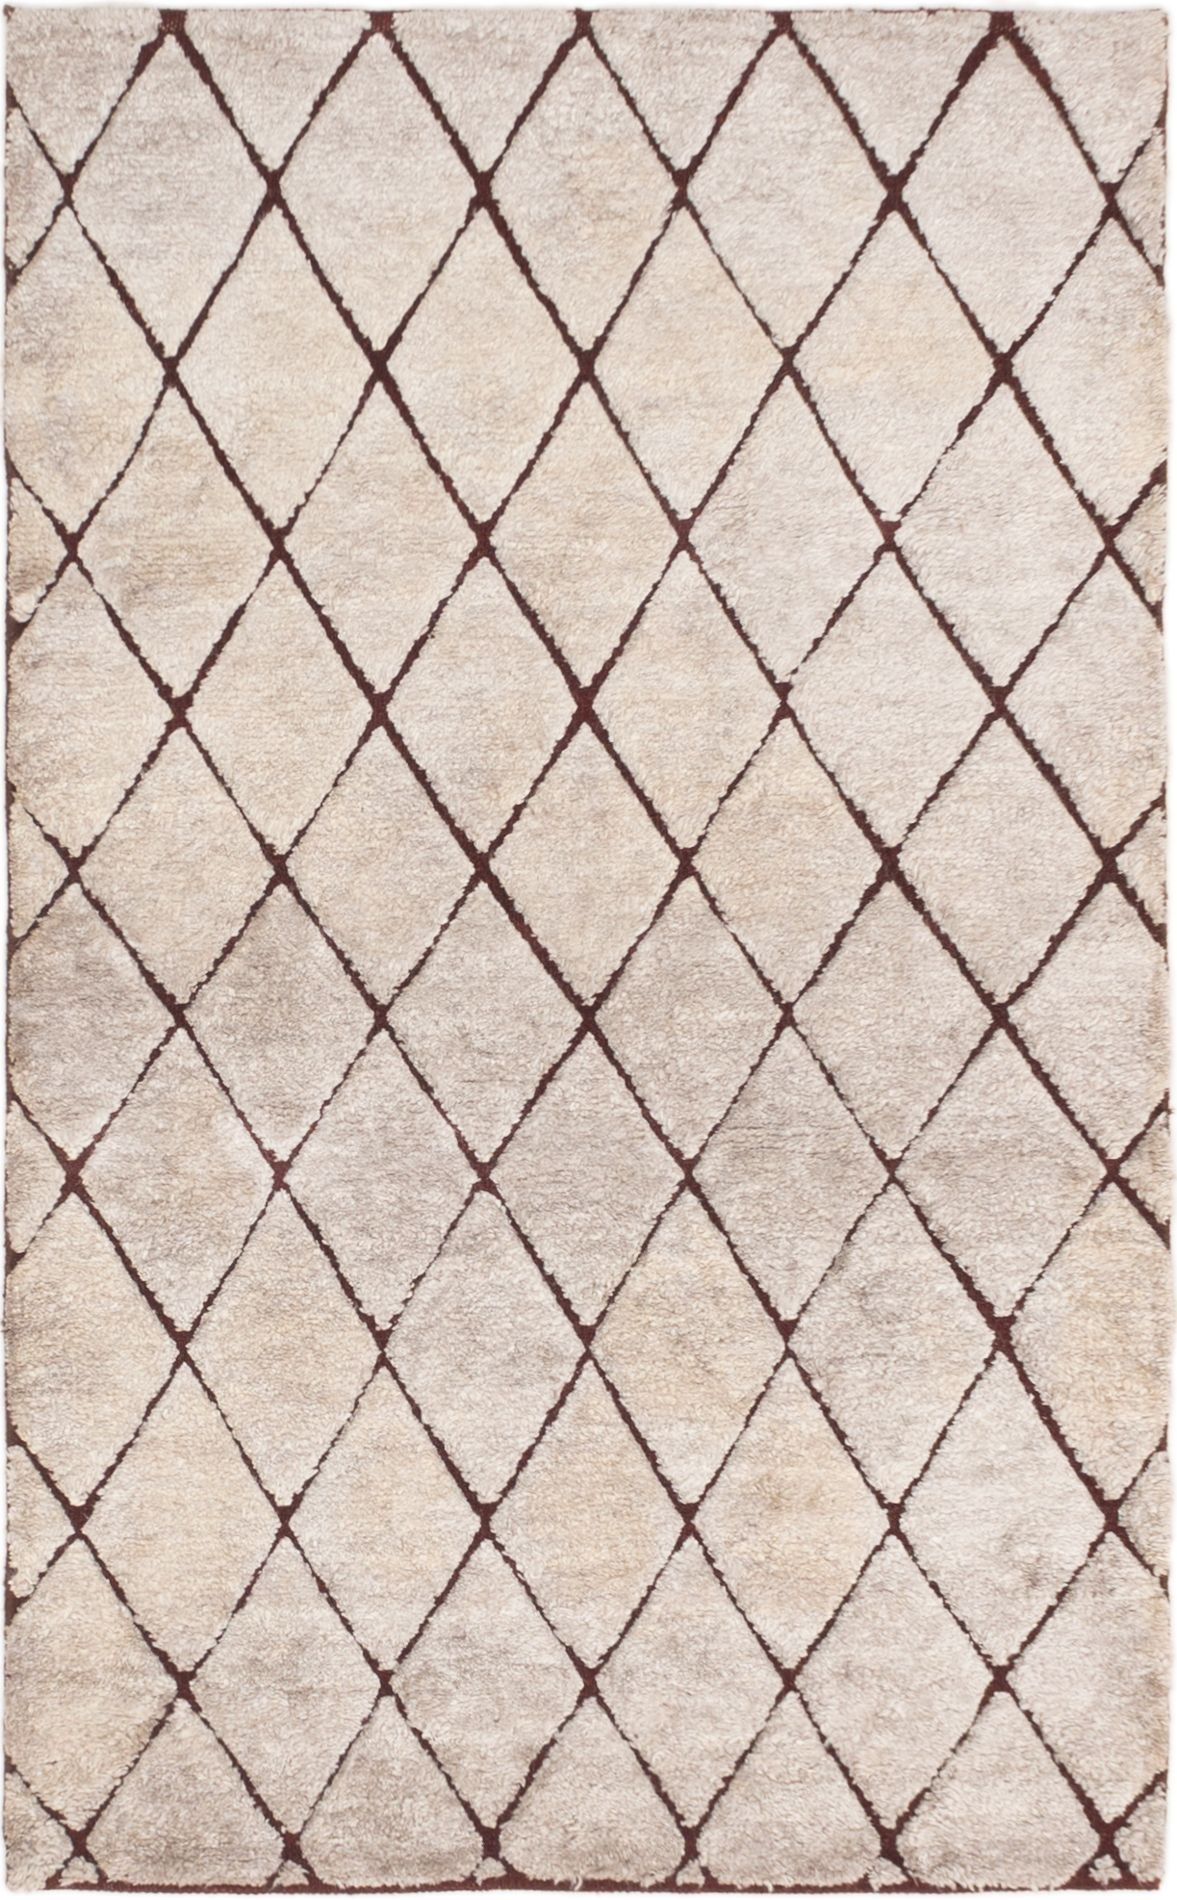 Hand-knotted Arlequin Light Grey Wool Rug 4'2" x 6'8" Size: 4'2" x 6'8"  